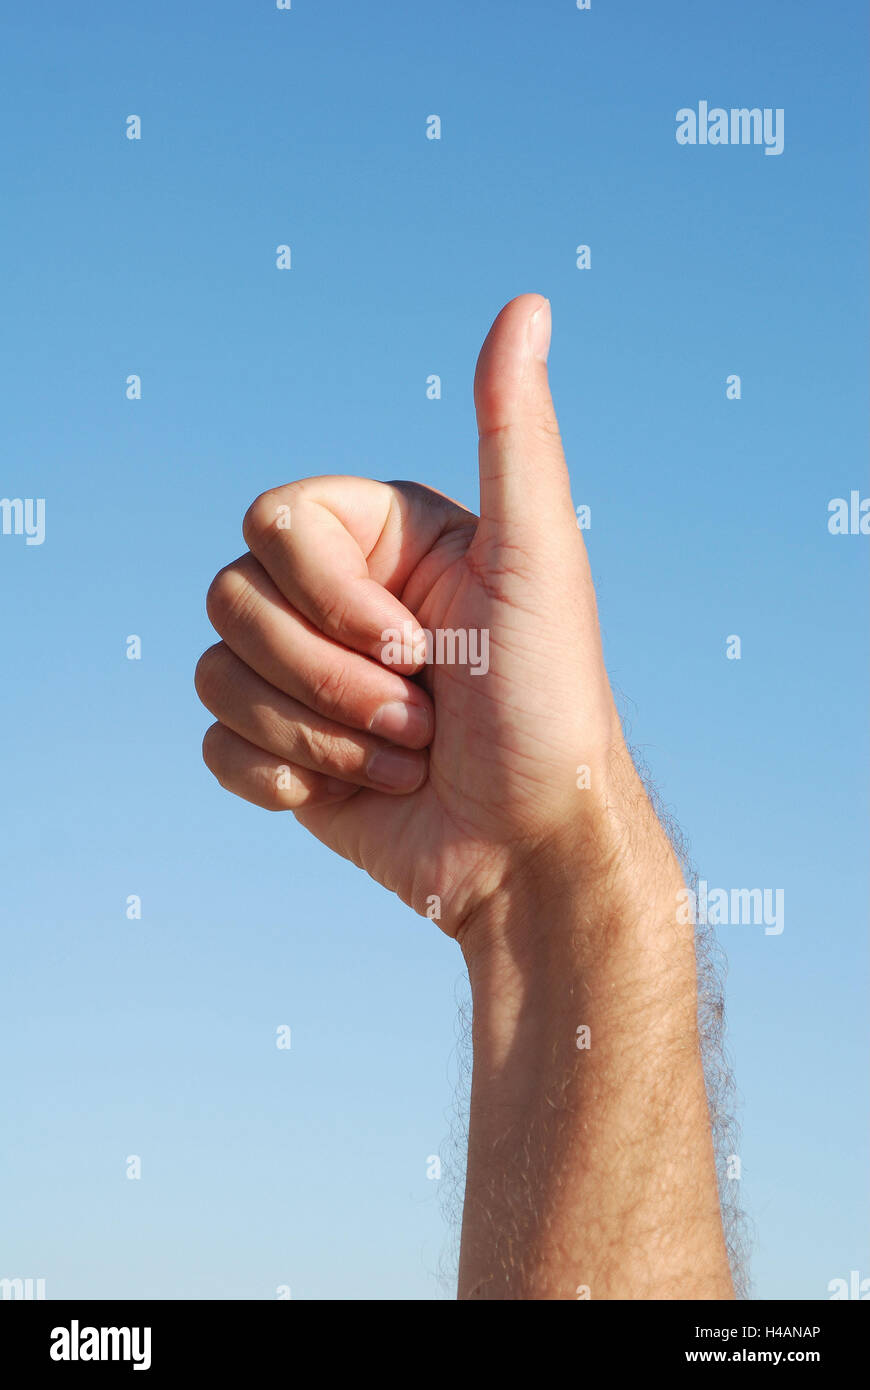 Man, hand, pollex, hold up, man's hand, manly, finger, figure, okay, OK., well, positively, attention, printout, body language, hand figure, super, excellently, outside, parts the body, medium close-up, detail, Stock Photo